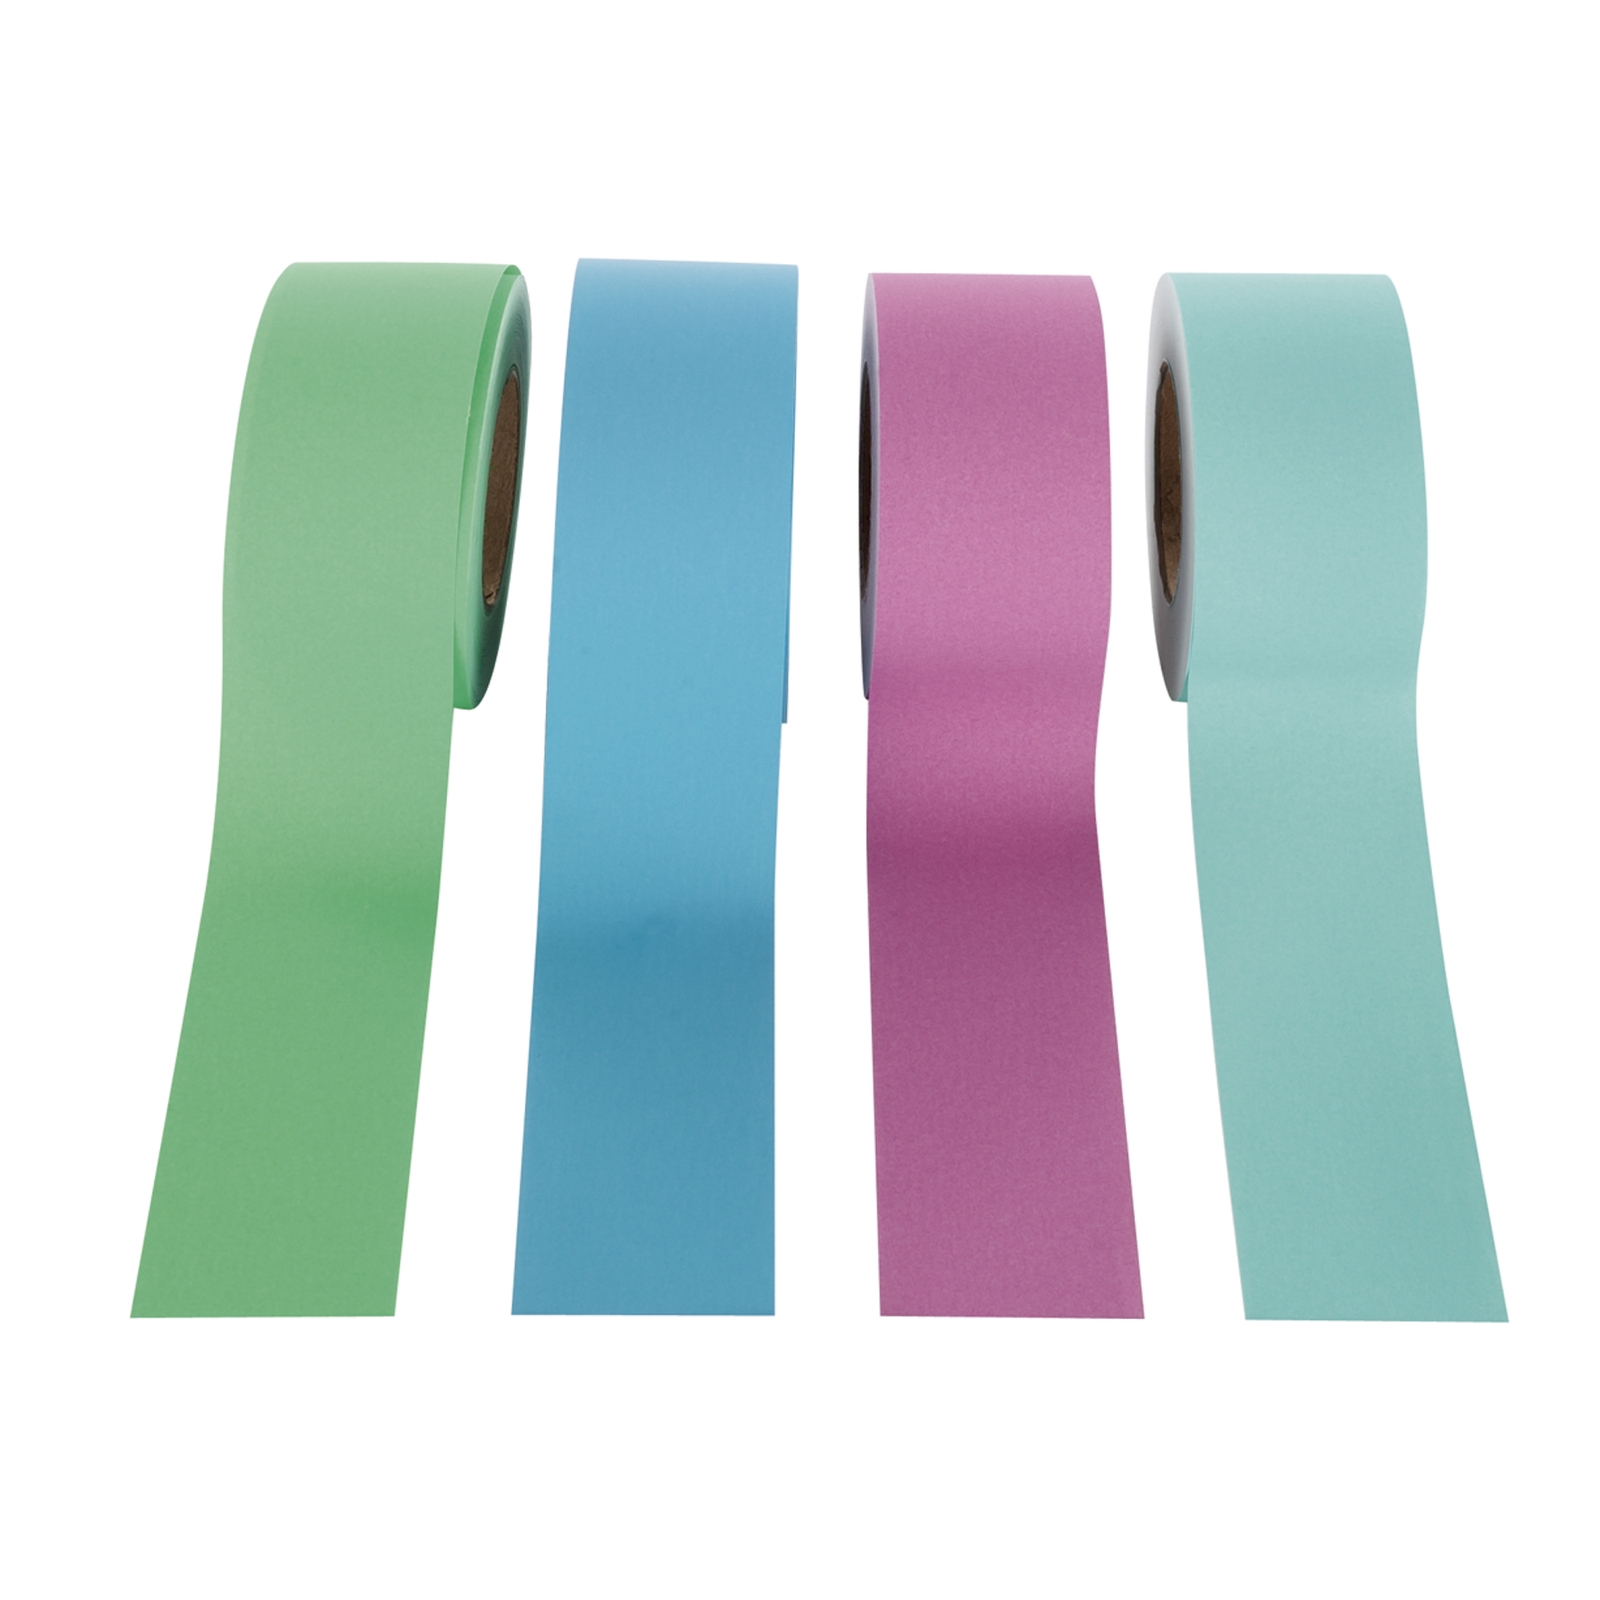 EduCraft Pastel Straight Paper Border Rolls - 48mm x 50m - Assorted - Pack of 4